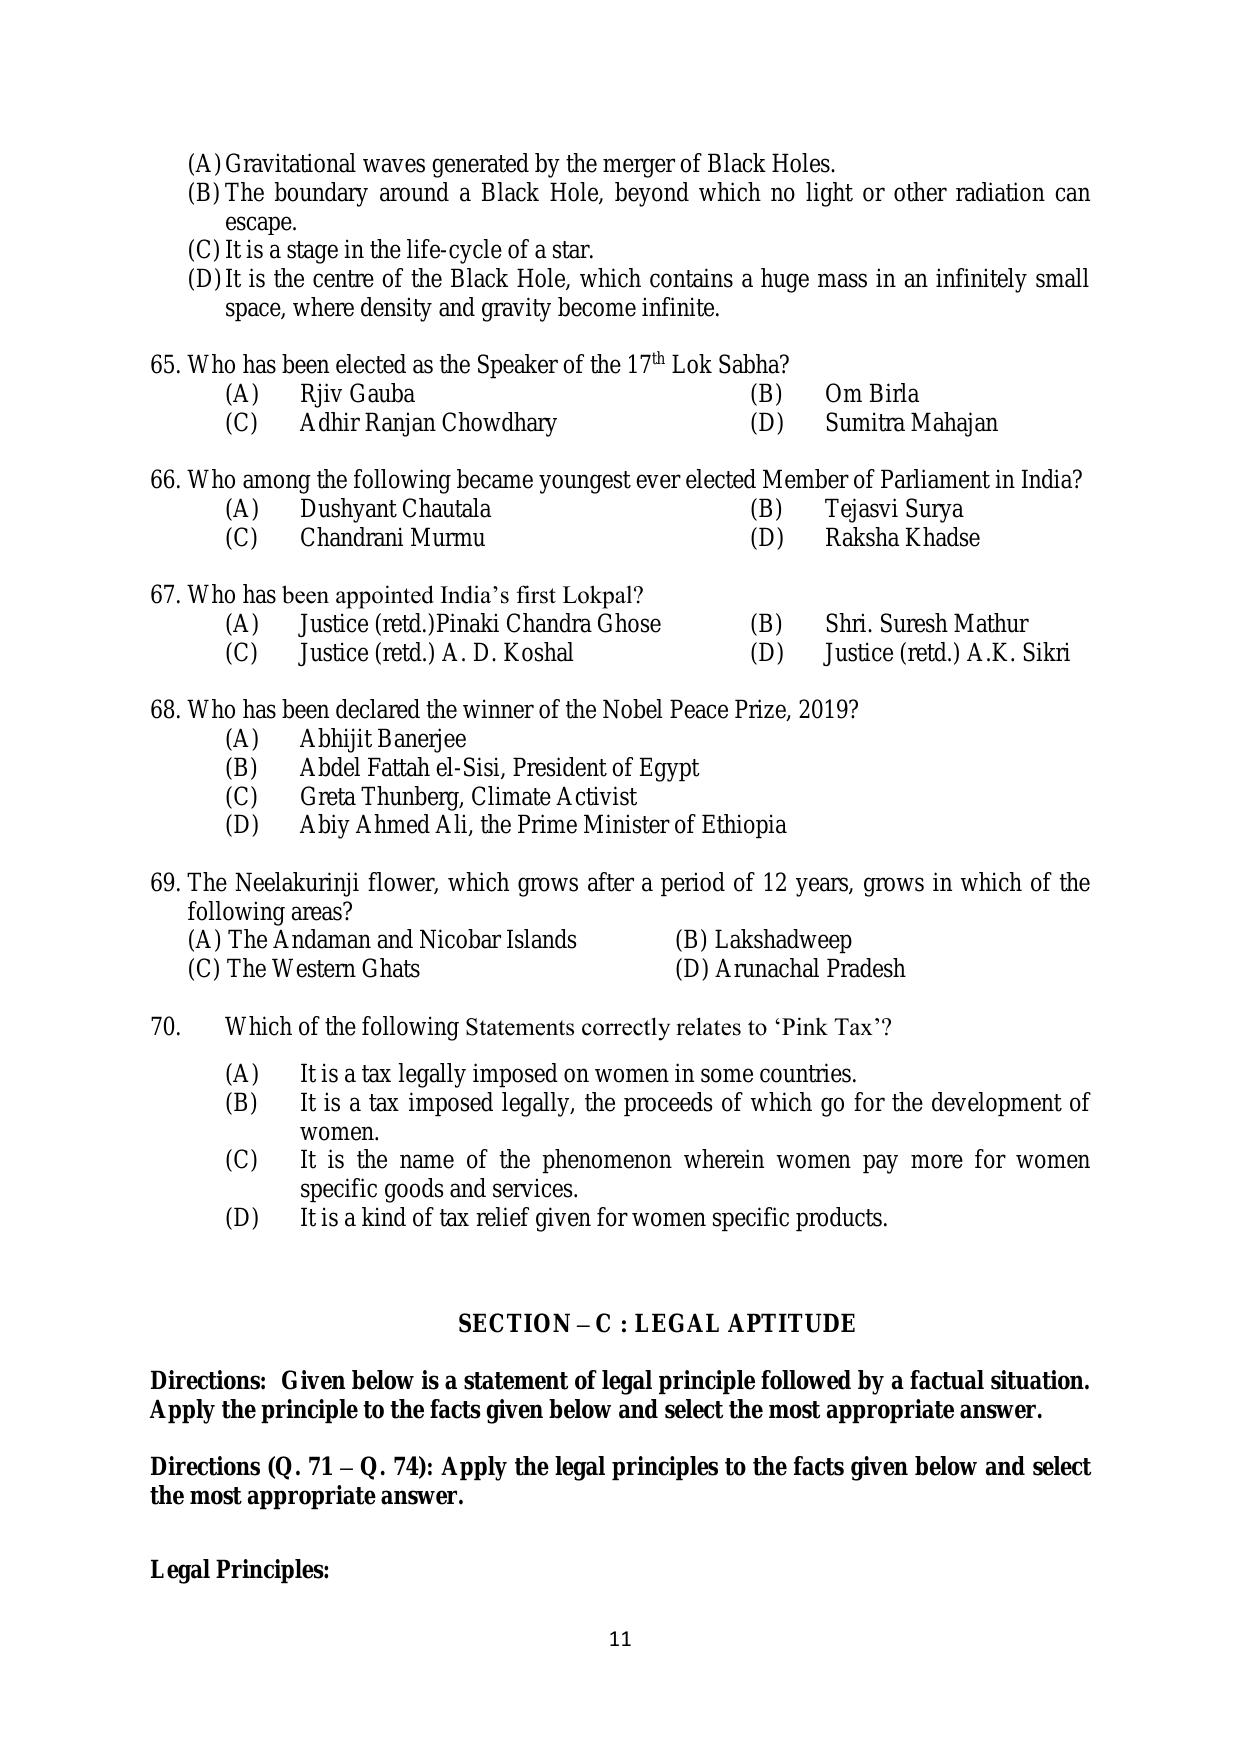 AILET 2020 Question Paper for BA LLB - Page 11